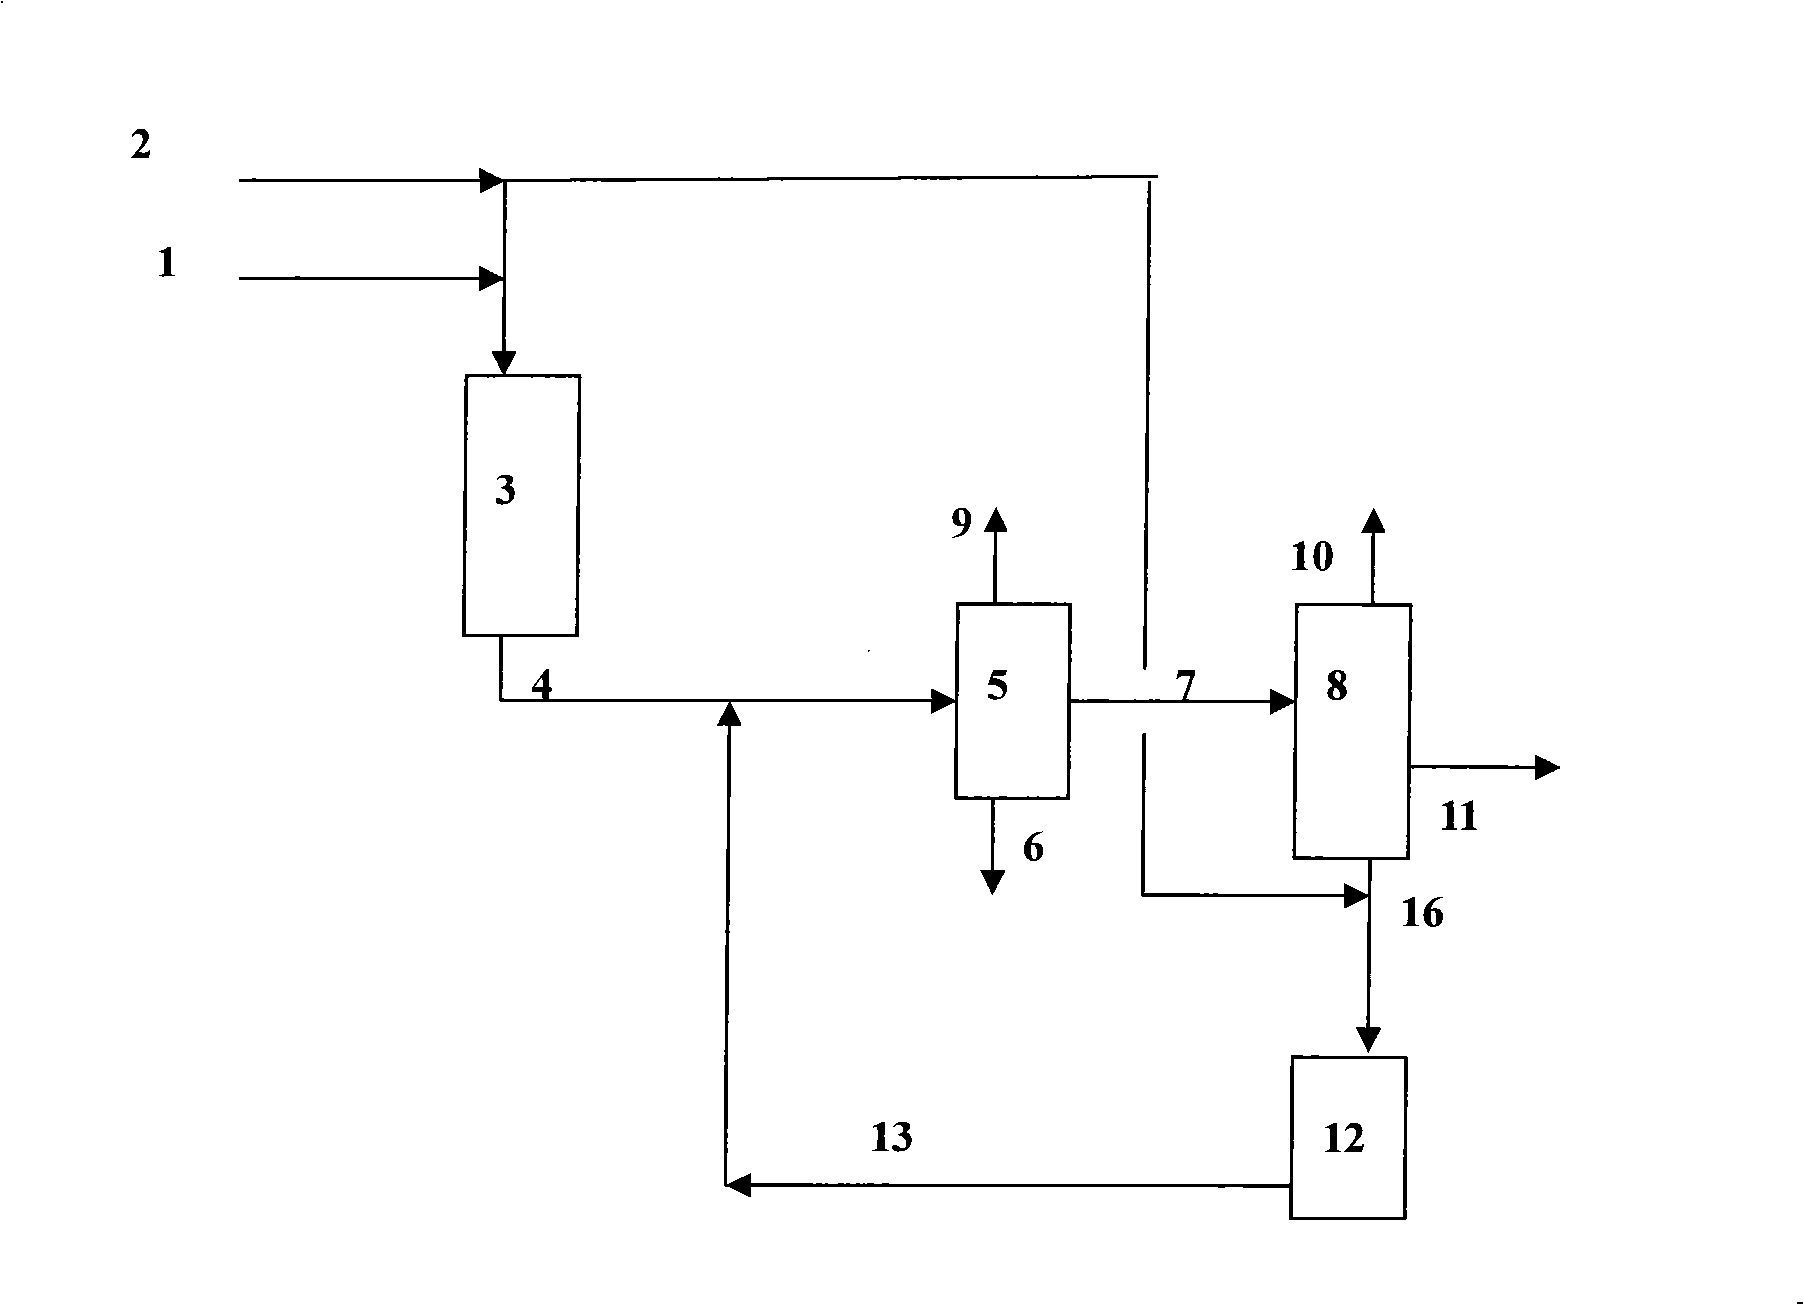 Method for preparing fuel oil with coal oil hydrogenation